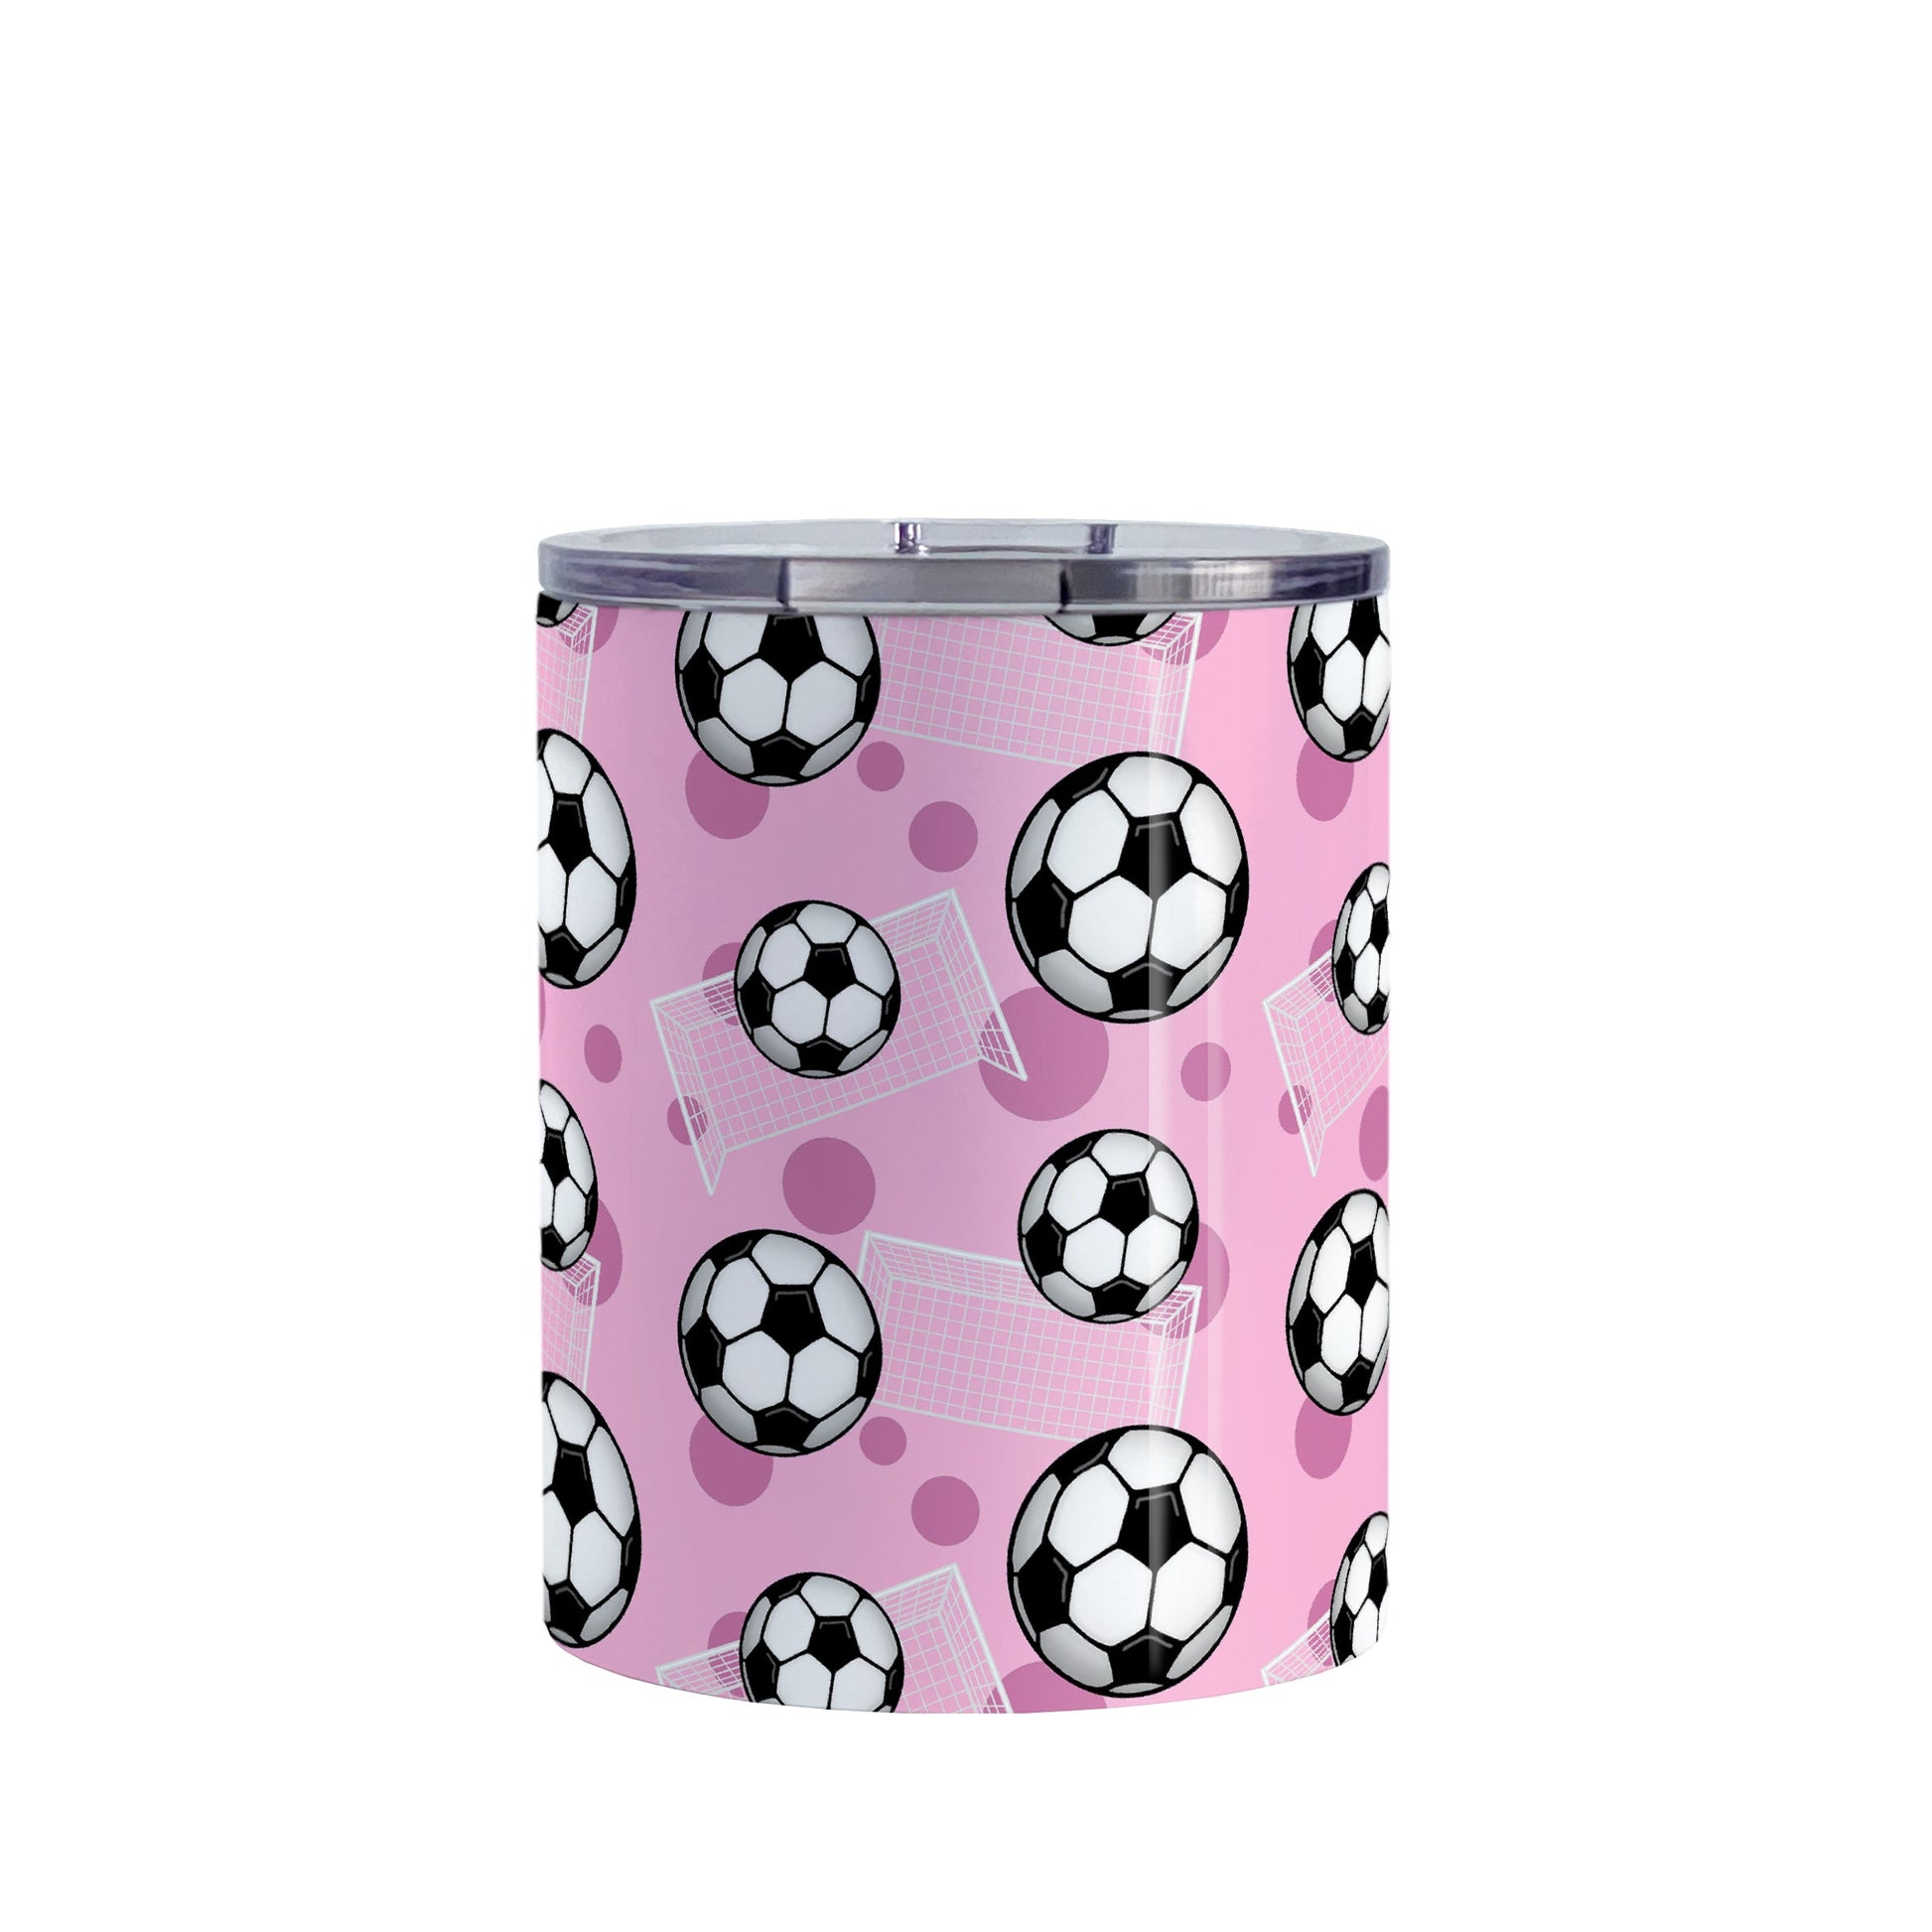 Soccer Ball and Goal Pattern Pink Tumbler Cup (10oz) at Amy's Coffee Mugs. A stainless steel insulated tumbler cup designed with a pattern of soccer balls and goals over a pink background that wraps around the cup. This pink soccer tumbler cup is perfect for people who love or play soccer.